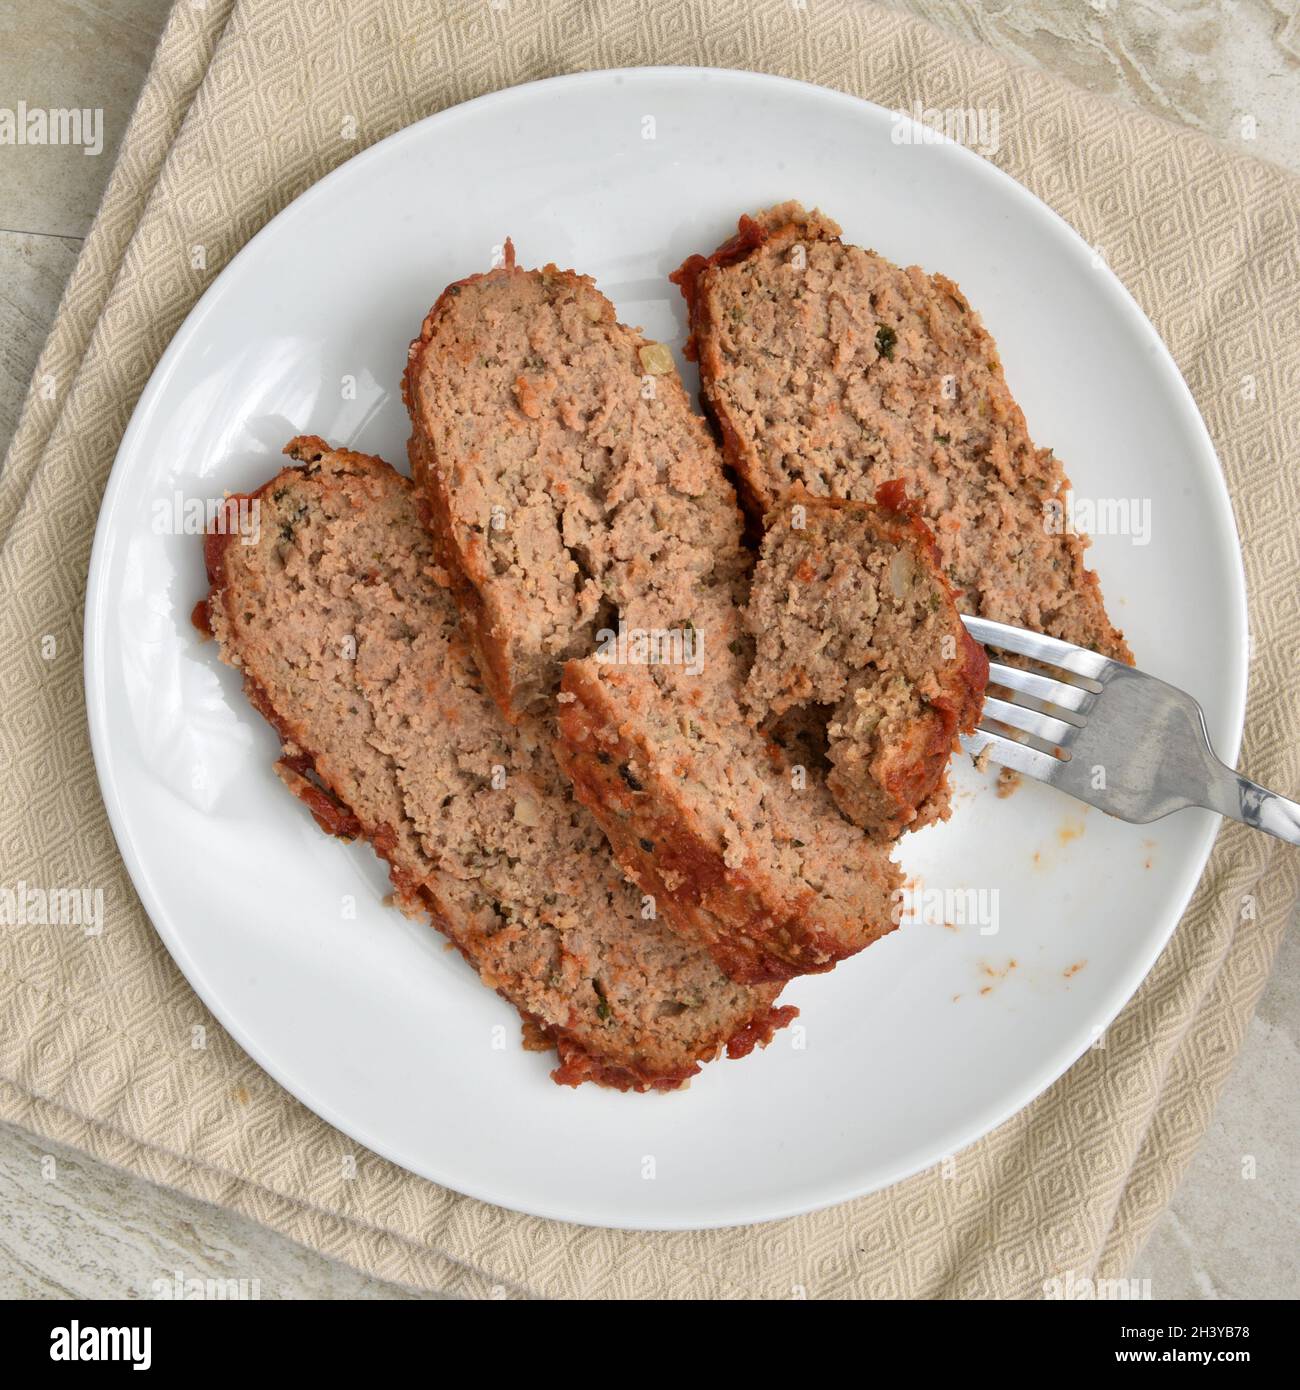 Fork taking a bite of fresh, hot sliced meatloaf on a plate, overhead view Stock Photo